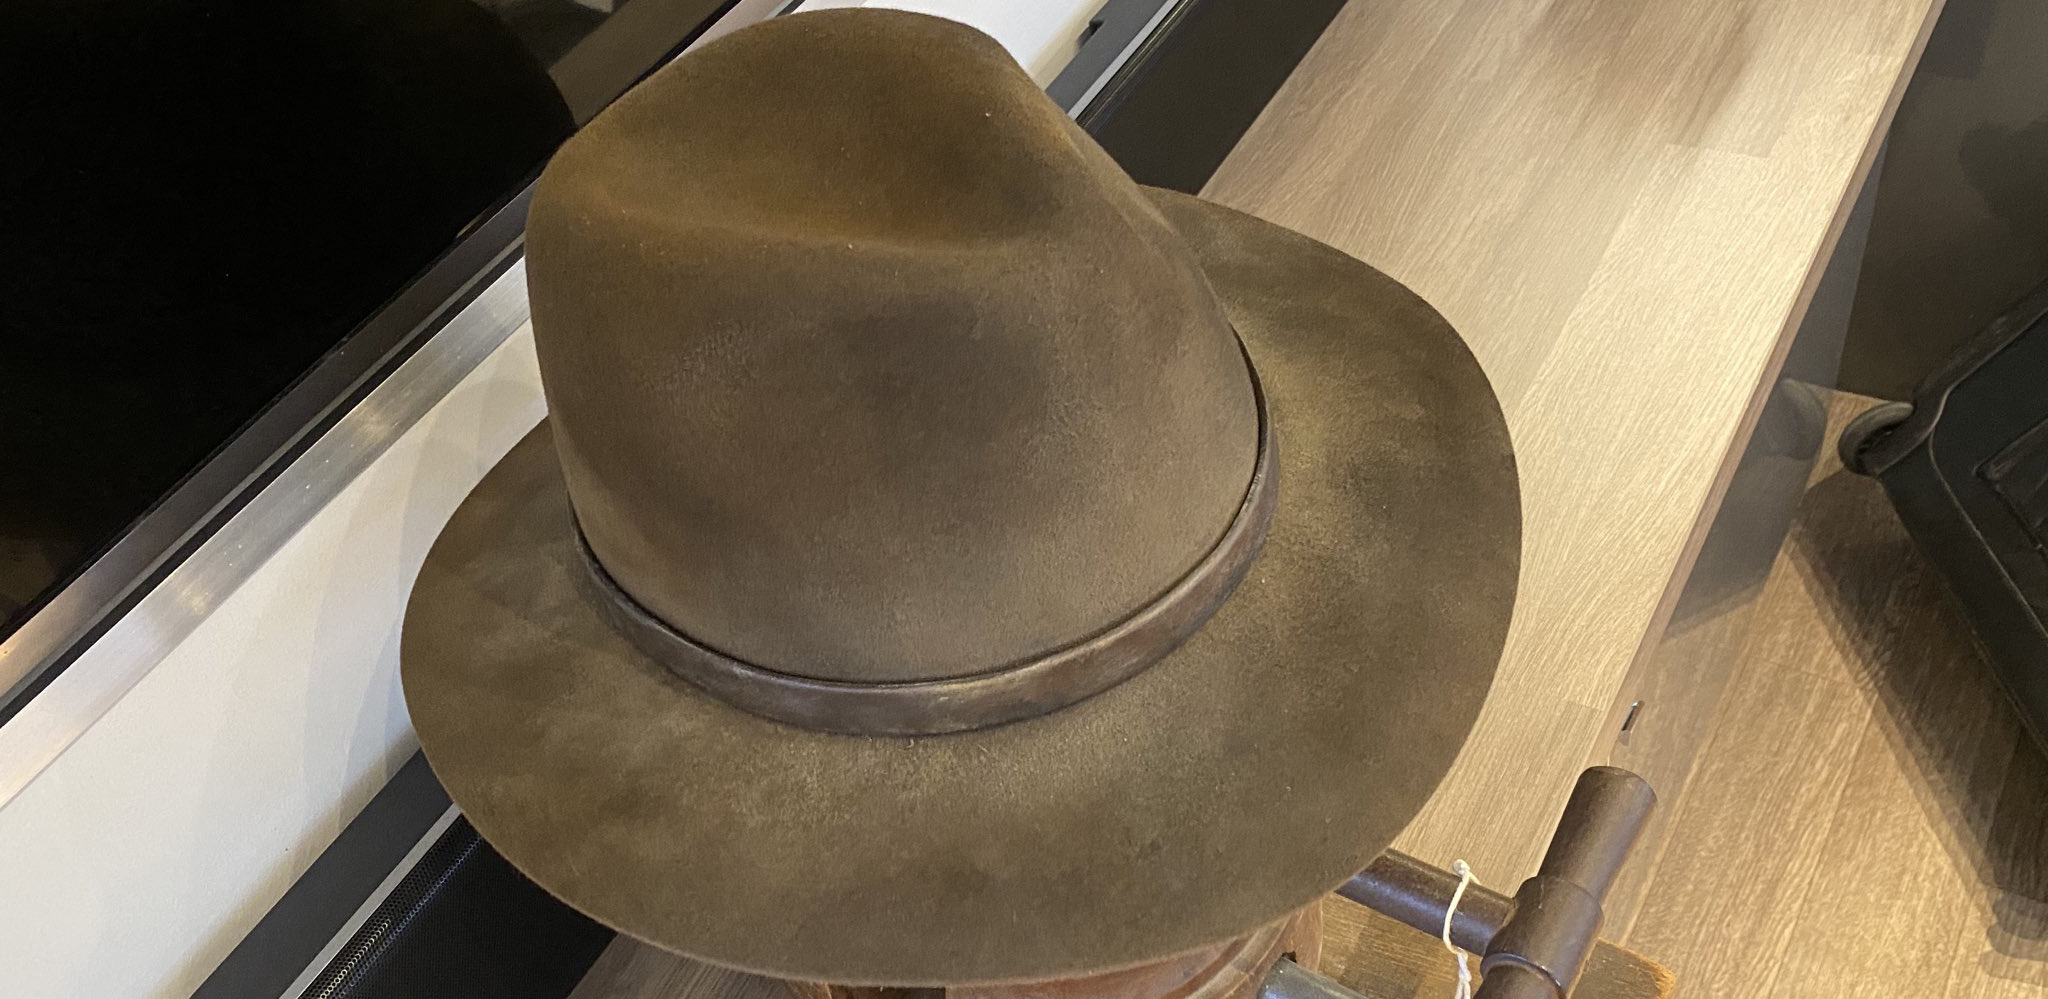 Sam Neill shows off Dr. Alan Grant’s hat for ‘Jurassic World: Dominion’!